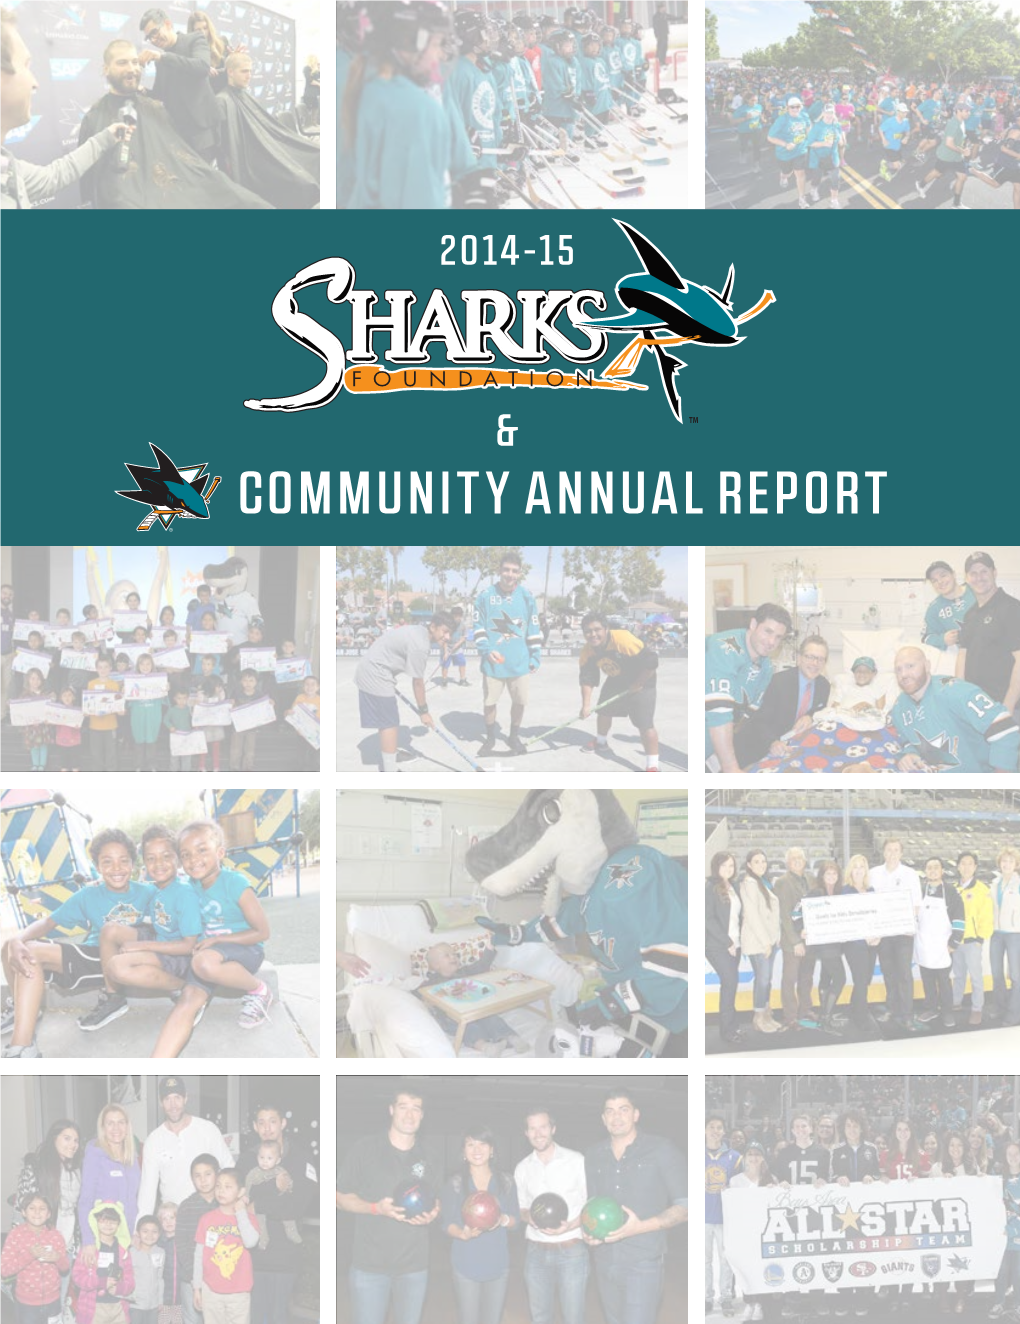 COMMUNITY ANNUAL REPORT CREDITS the 2014-15 Community Report Was Written, Designed, Edited and Produced by the Sharks Foundation